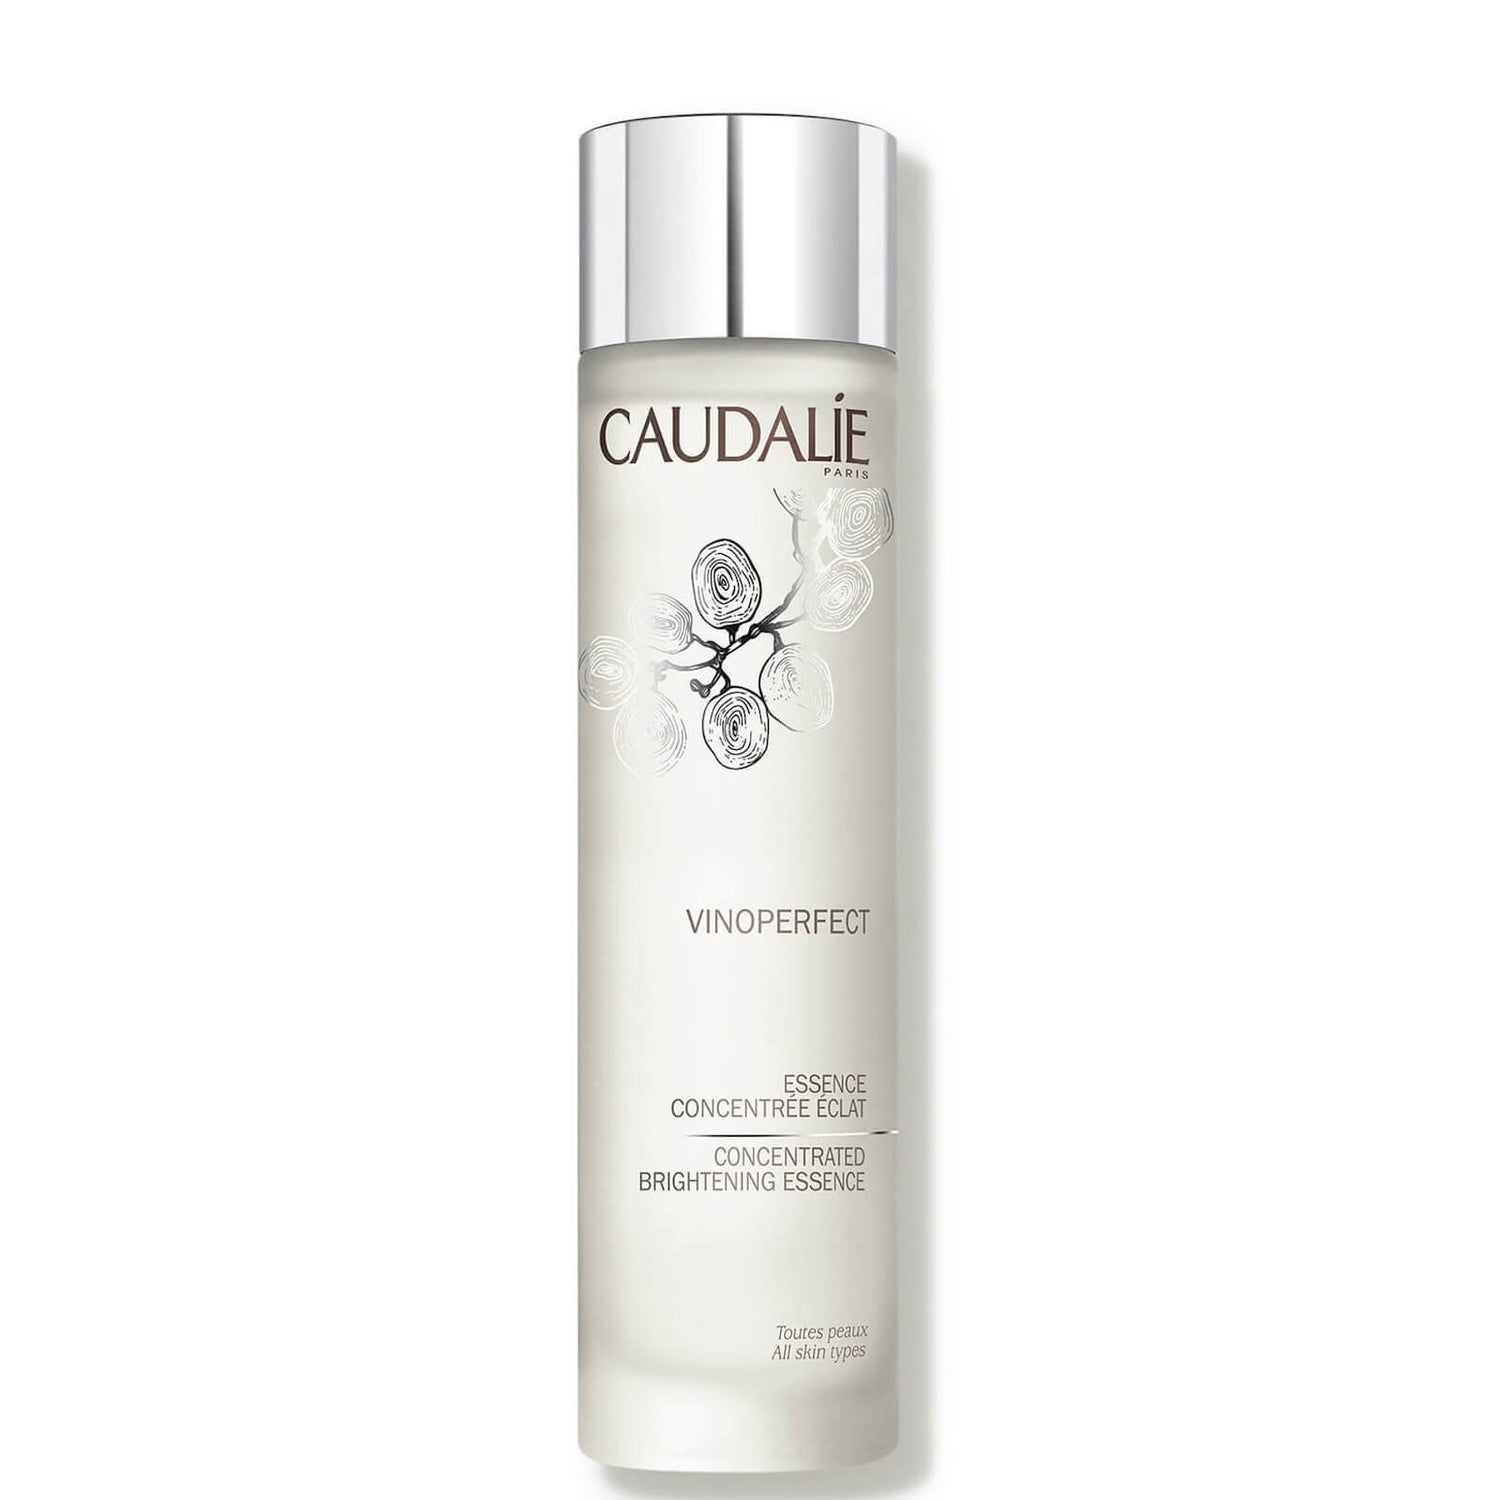 Caudalie Vinoperfect Concentrated Brightening Glycolic Essence - 150 mL